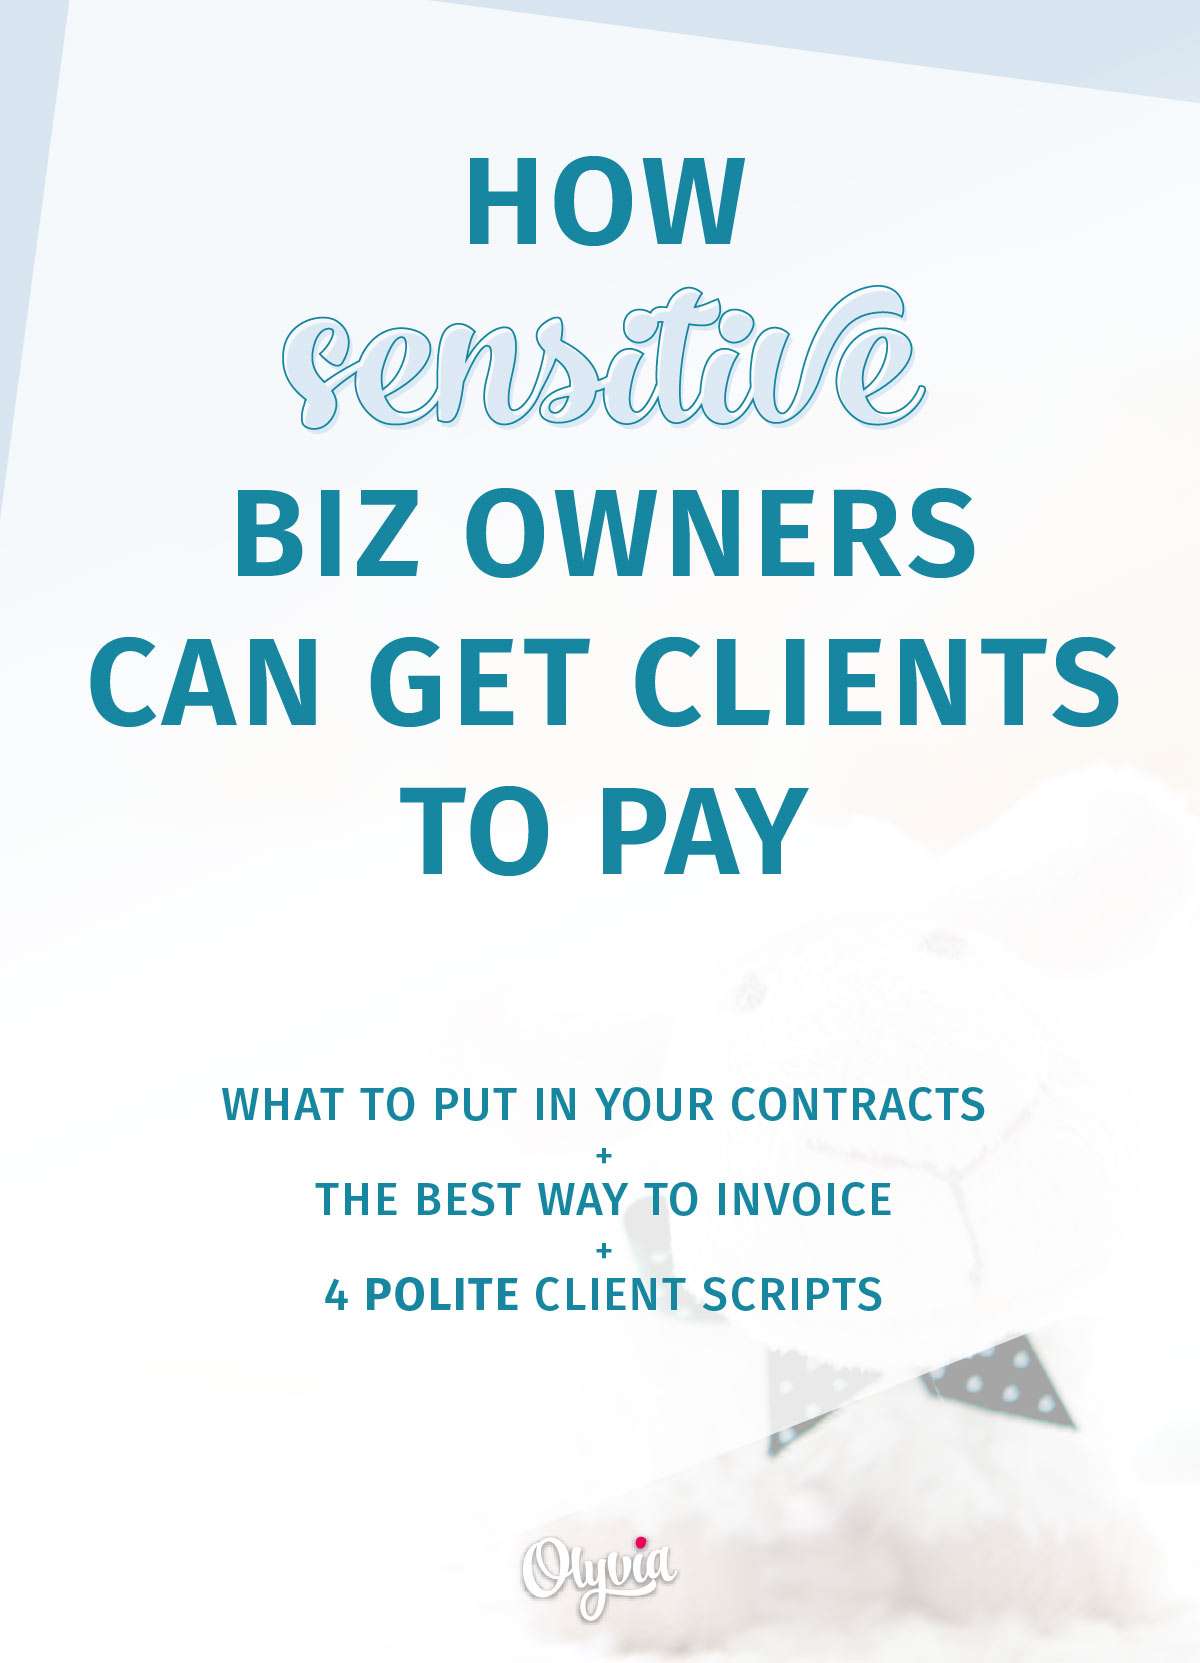 How to get paid by clients: what to put in your contracts, the best way to invoice, + 4 polite client scripts. (For the shy, sensitive business owners + entrepreneurs.)